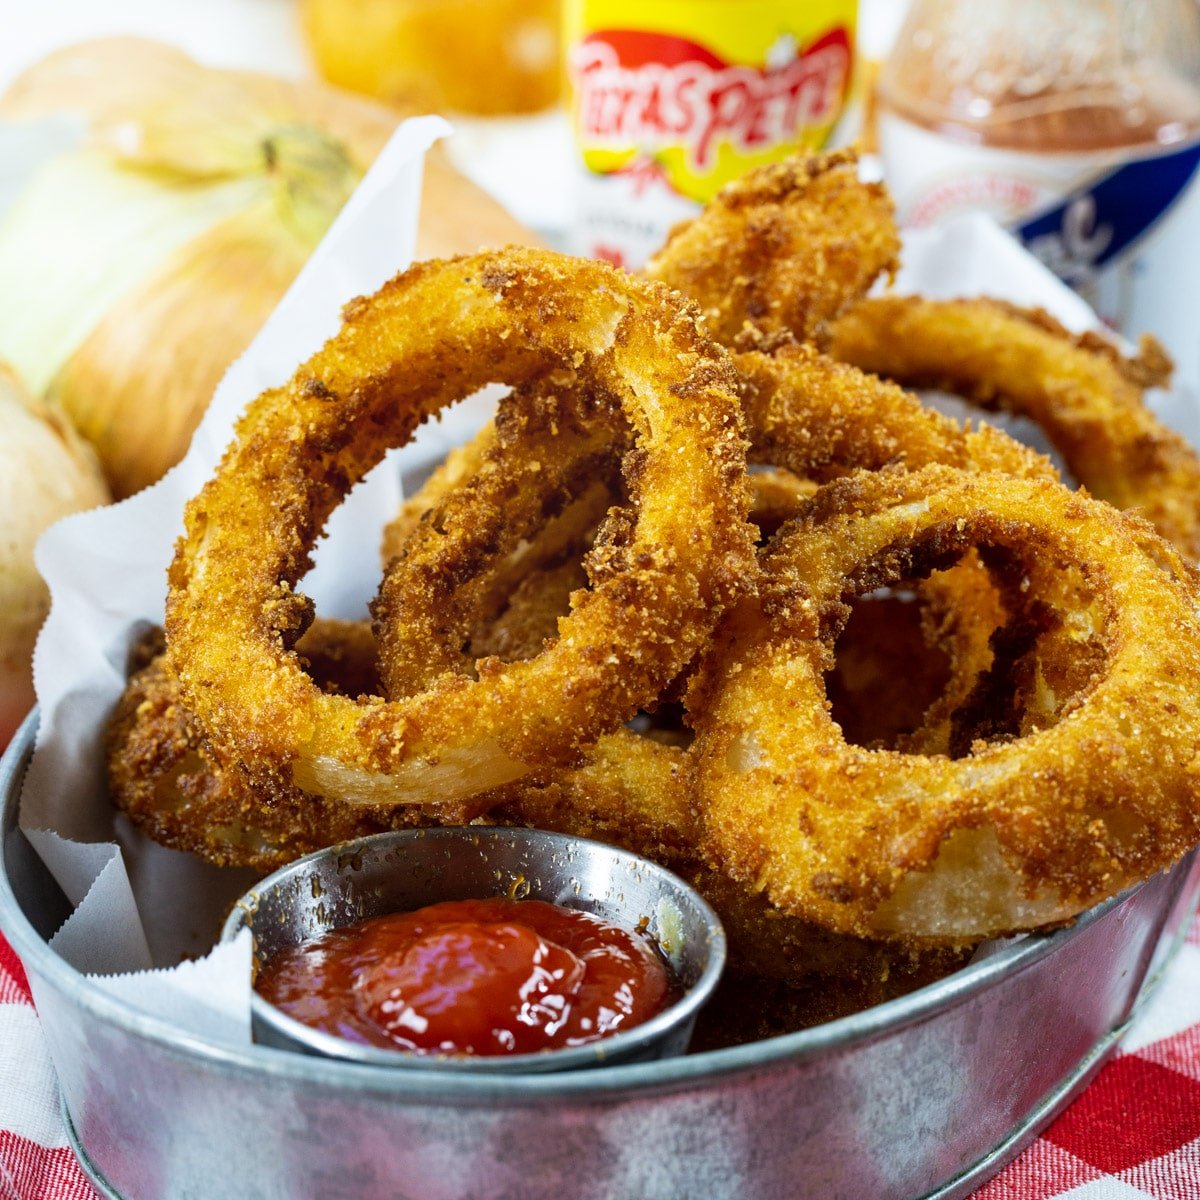 Hot Sauce Marinated Onion Rings in a serving dish with ketchup.